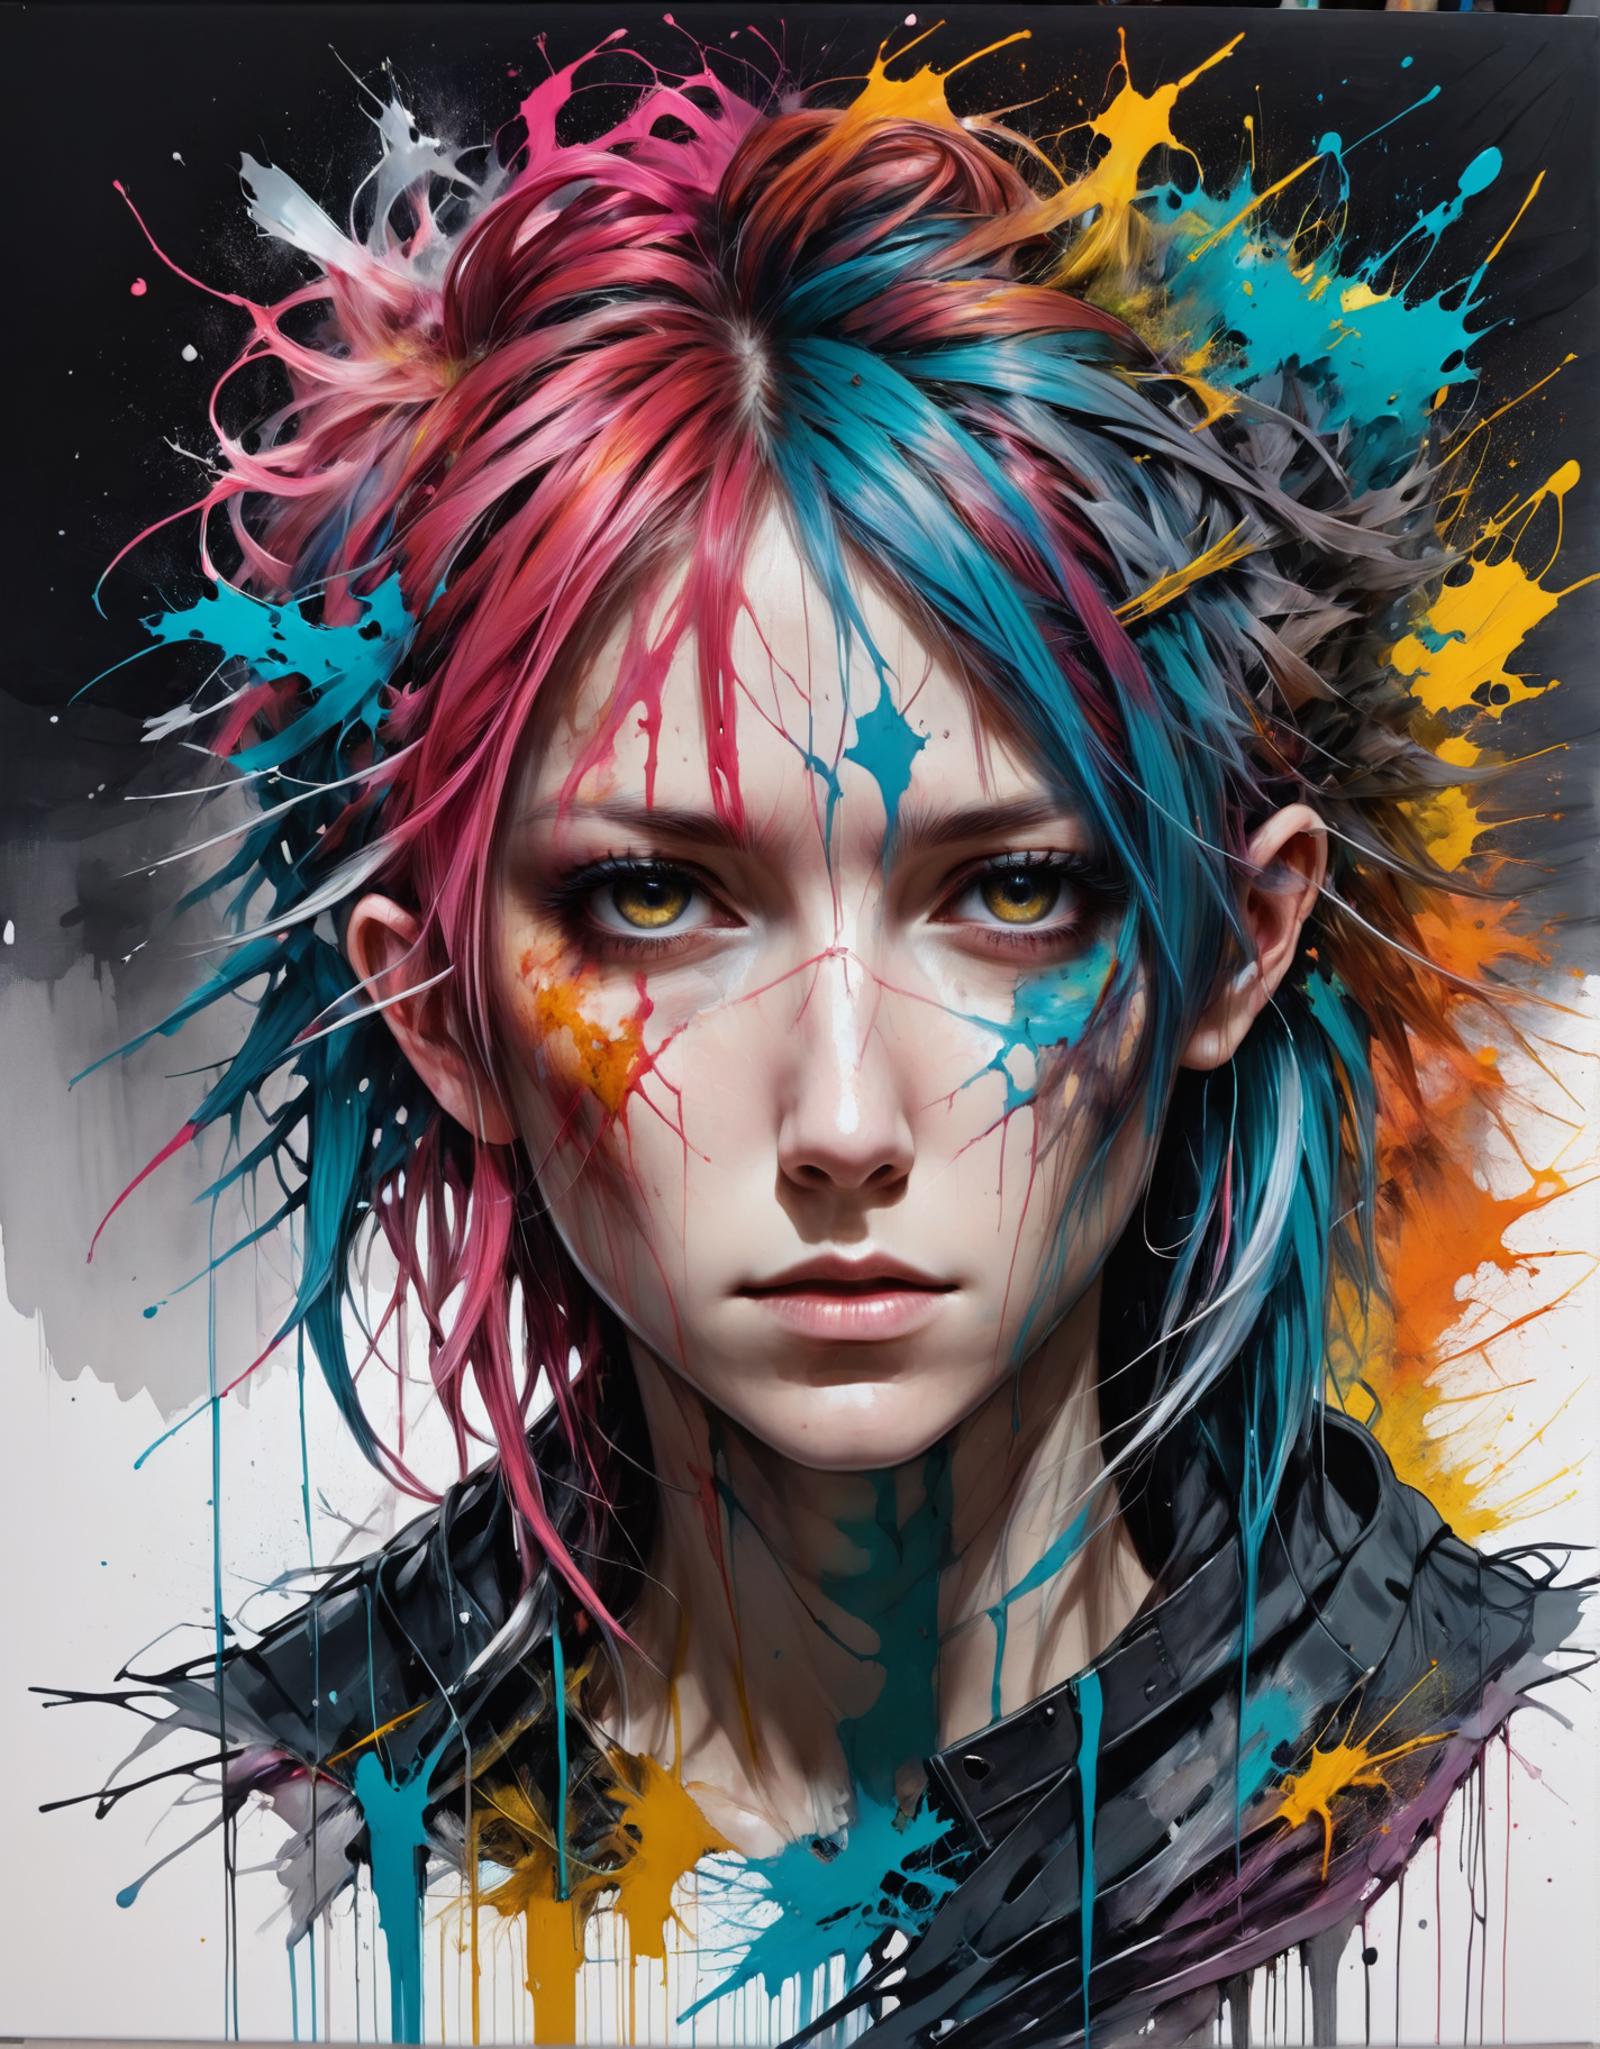 Carne Griffiths XL Style LoRa image by Deformer_Toby